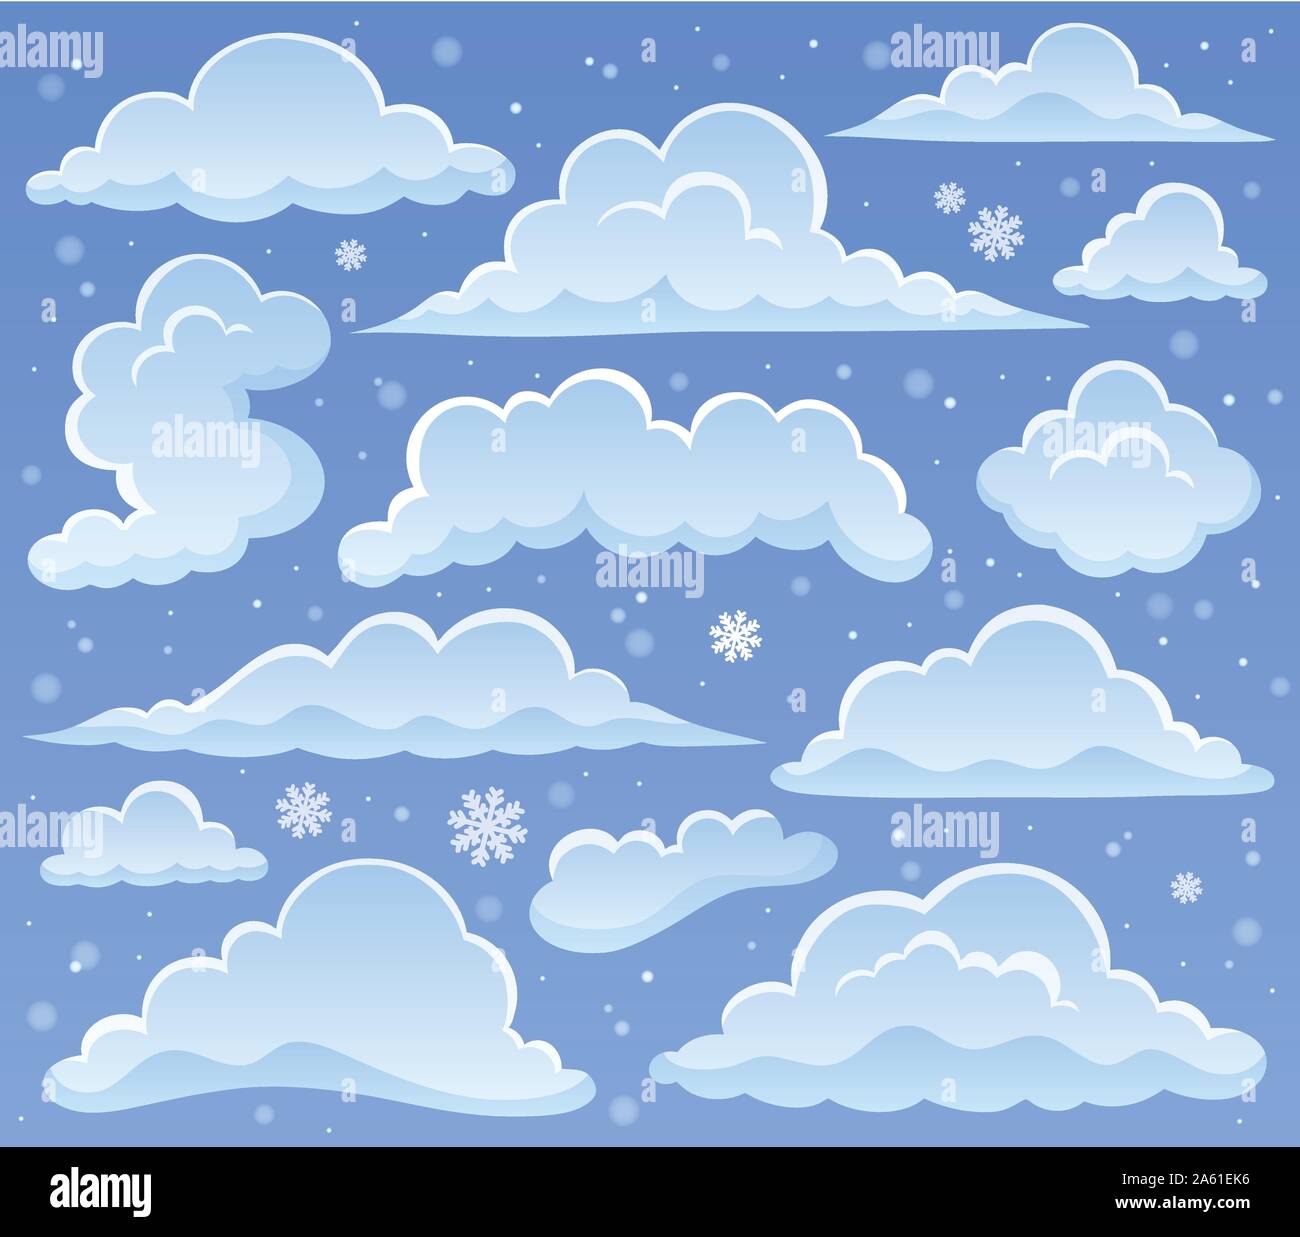 Clouds topic image 6 - eps10 vector illustration. Stock Vector